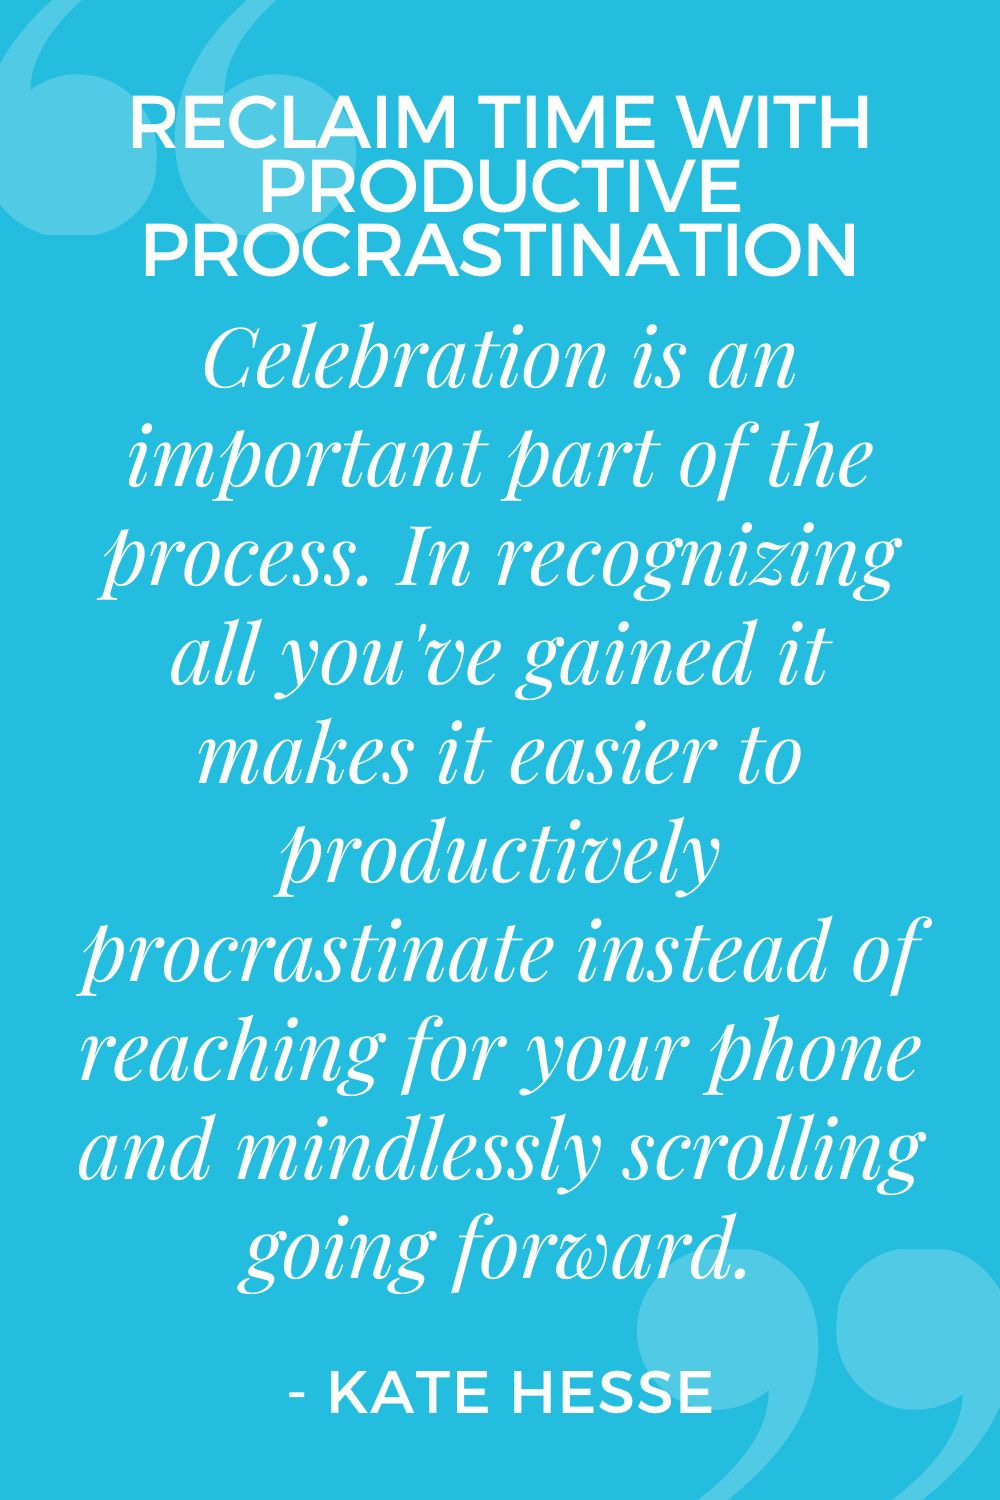 Celebration is an important part of the process. In recognizing all you've gained it makes it easier to productively procrastinate instead of reaching for your phone and mindlessly scrolling going forward.